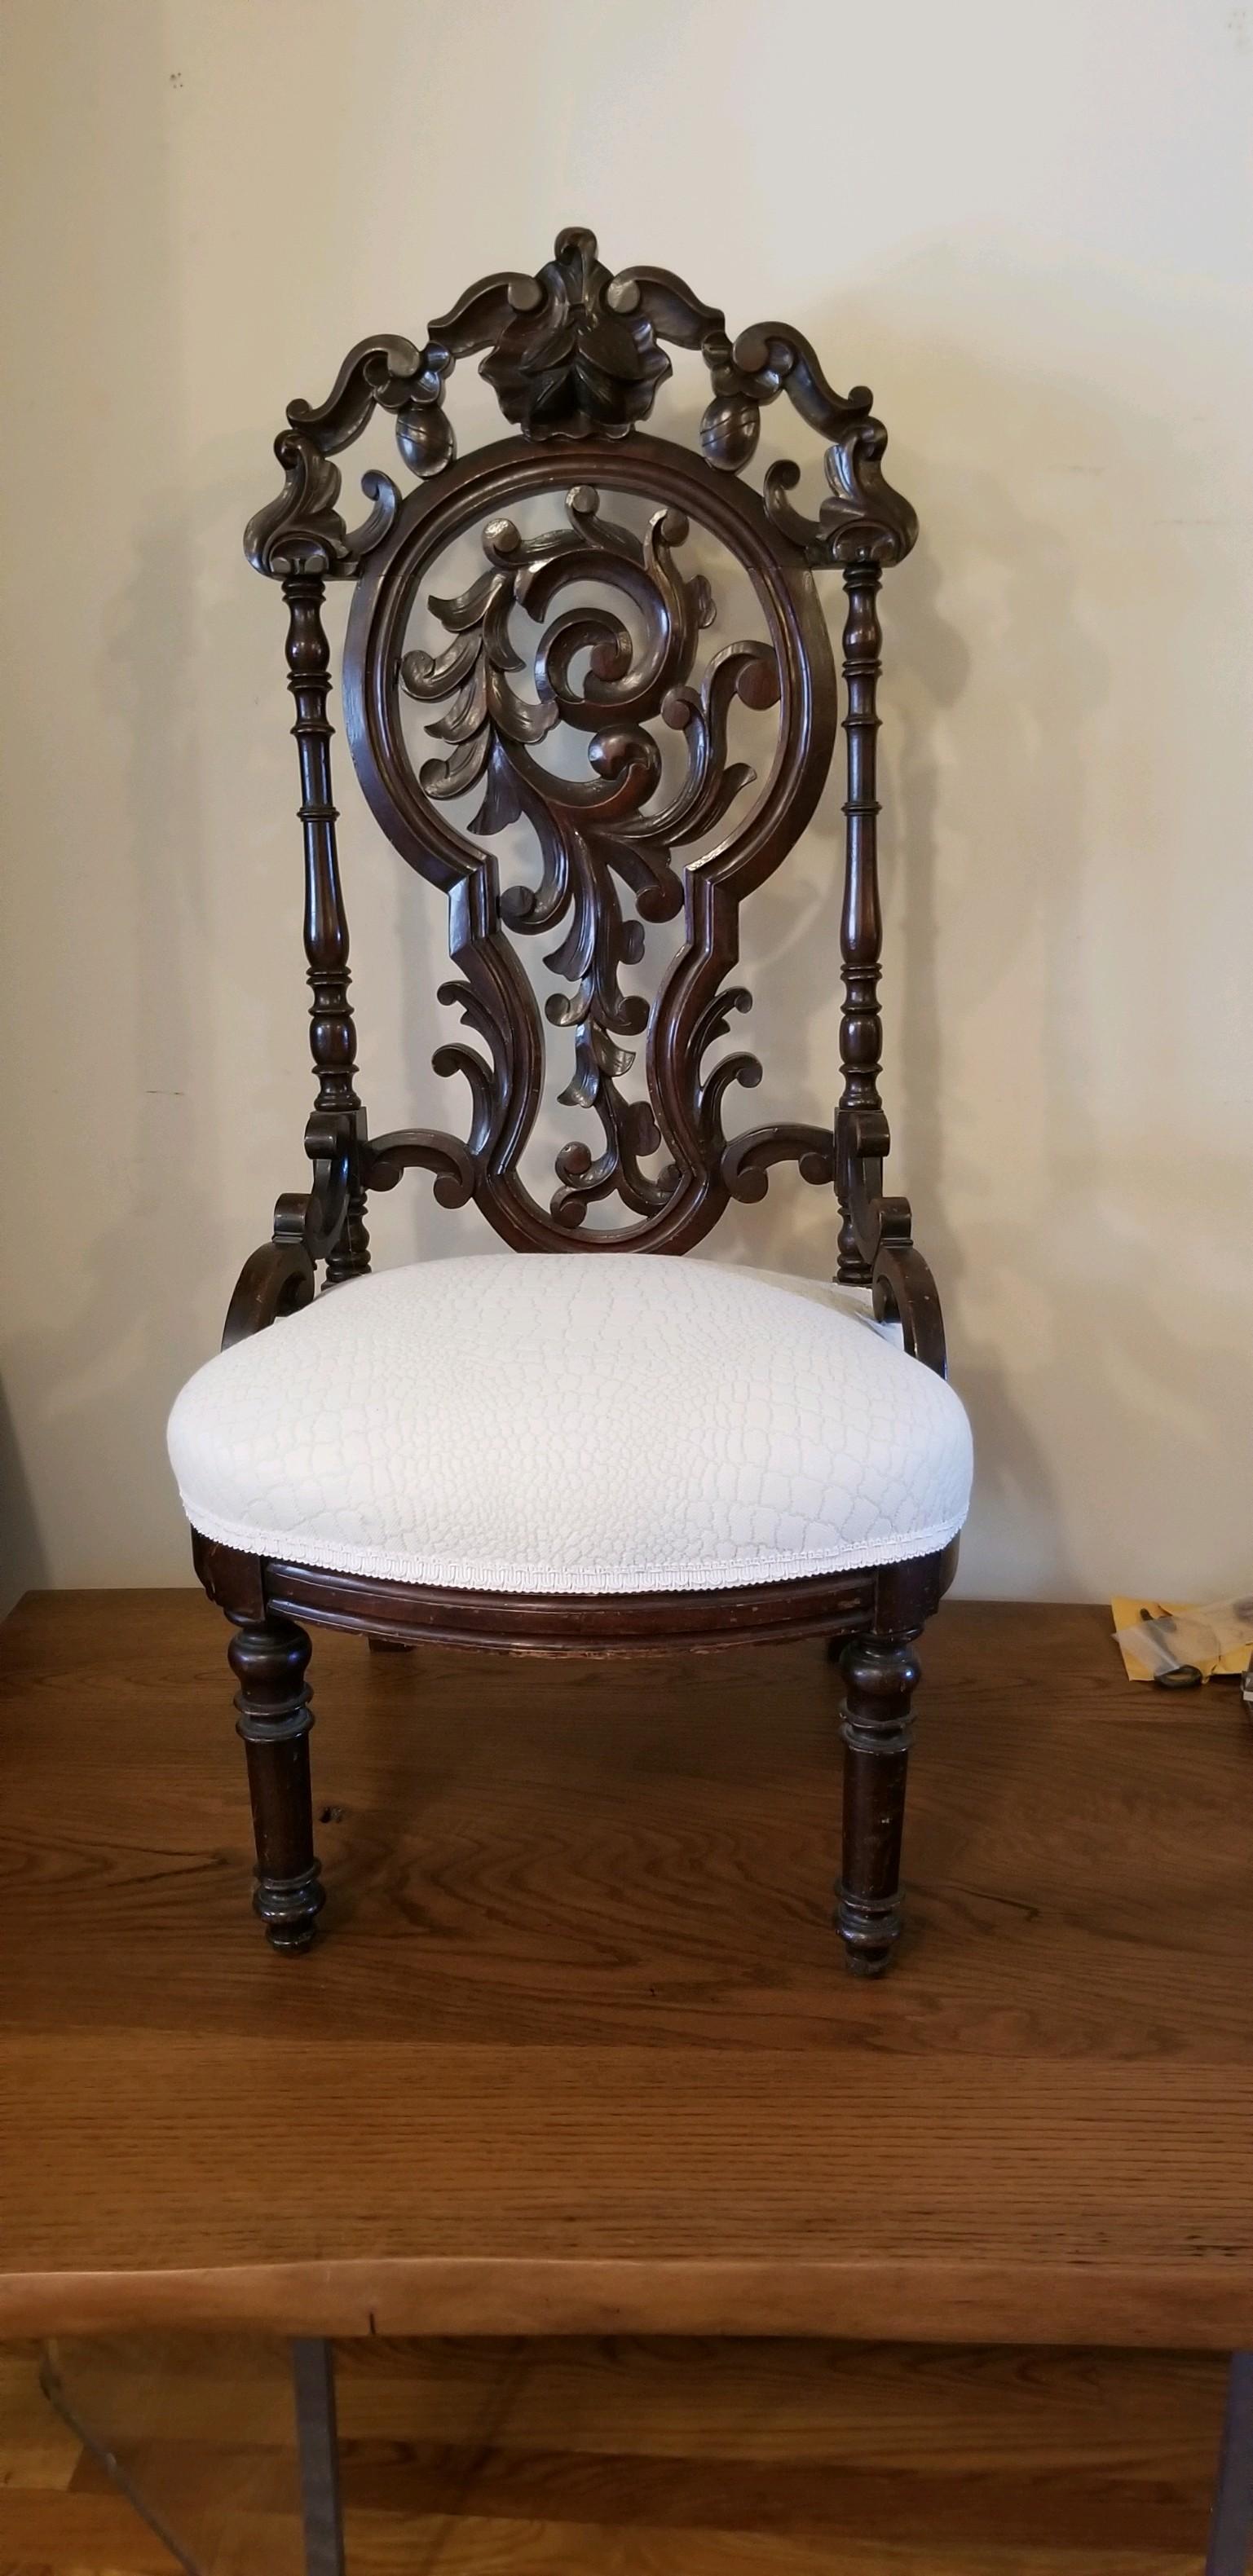 A wonderfully carved Victorian ladies chair in the style of Belter. Seat covered in alligator woven cotton. Off white in color. I use these chairs as sculpture in a room. Extreme in proportion and character. It adds a layered quality to any